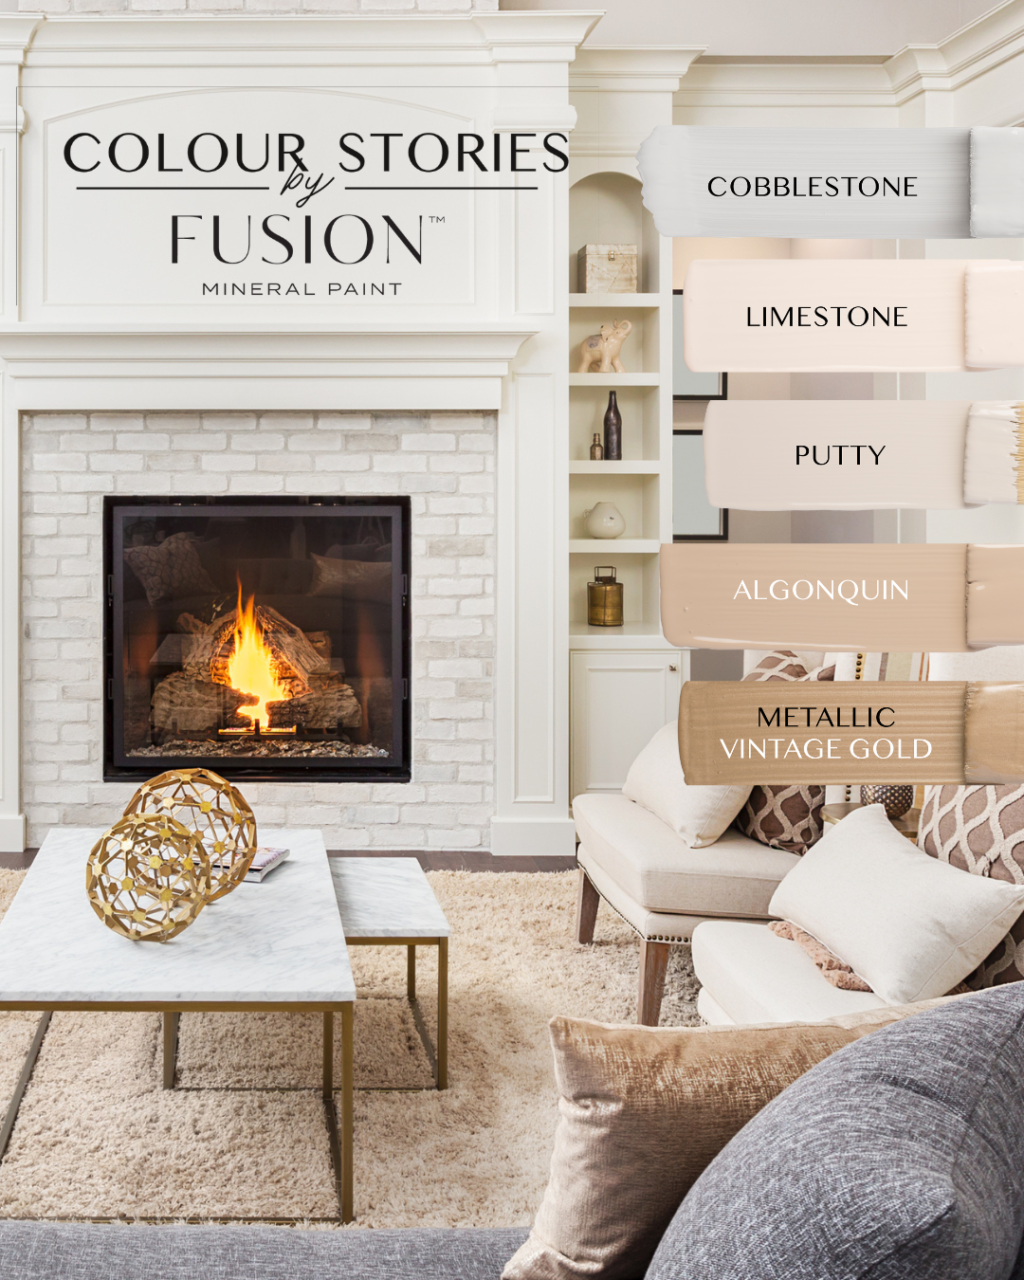 November Fusion™ Mineral Paint colour story